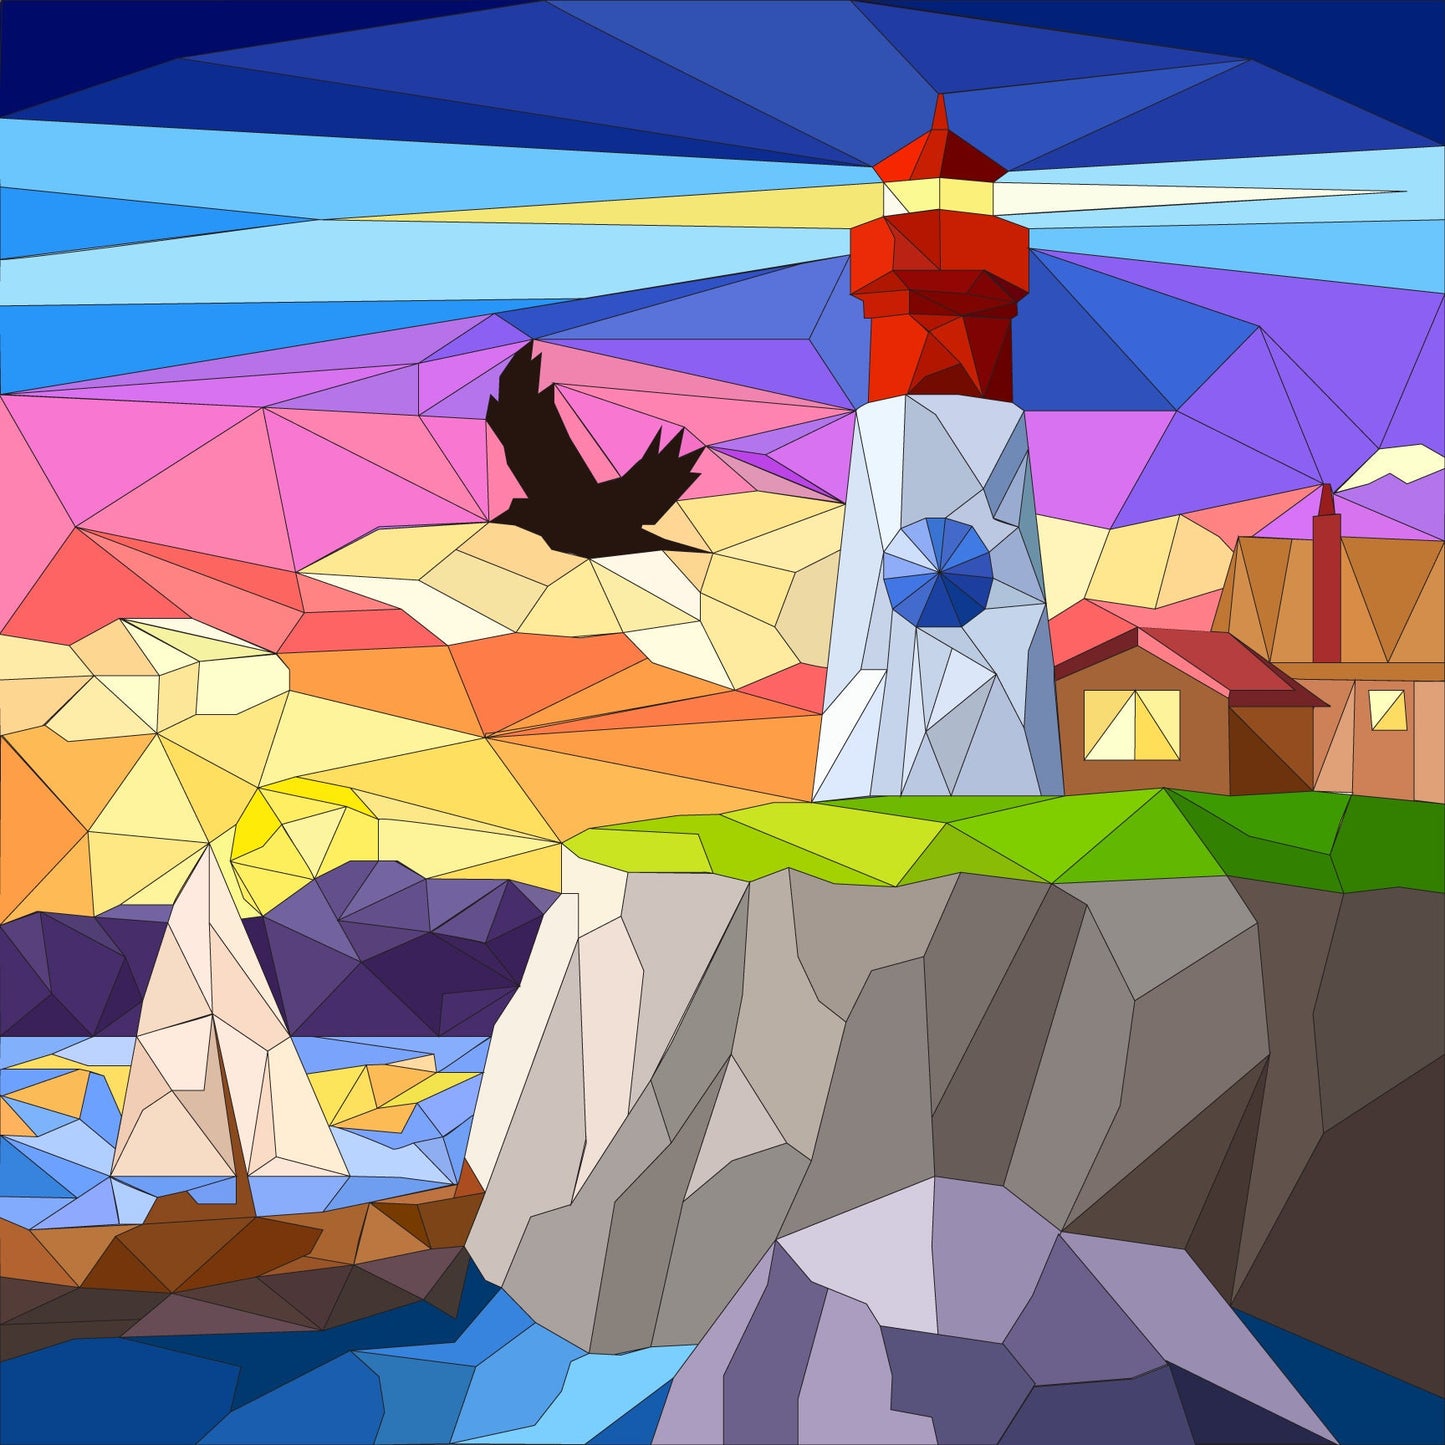 24x24" Lighthouse Barn Quilt PDF Pattern, SVG Pattern, Wood quilt to paint for outdoors Bundle